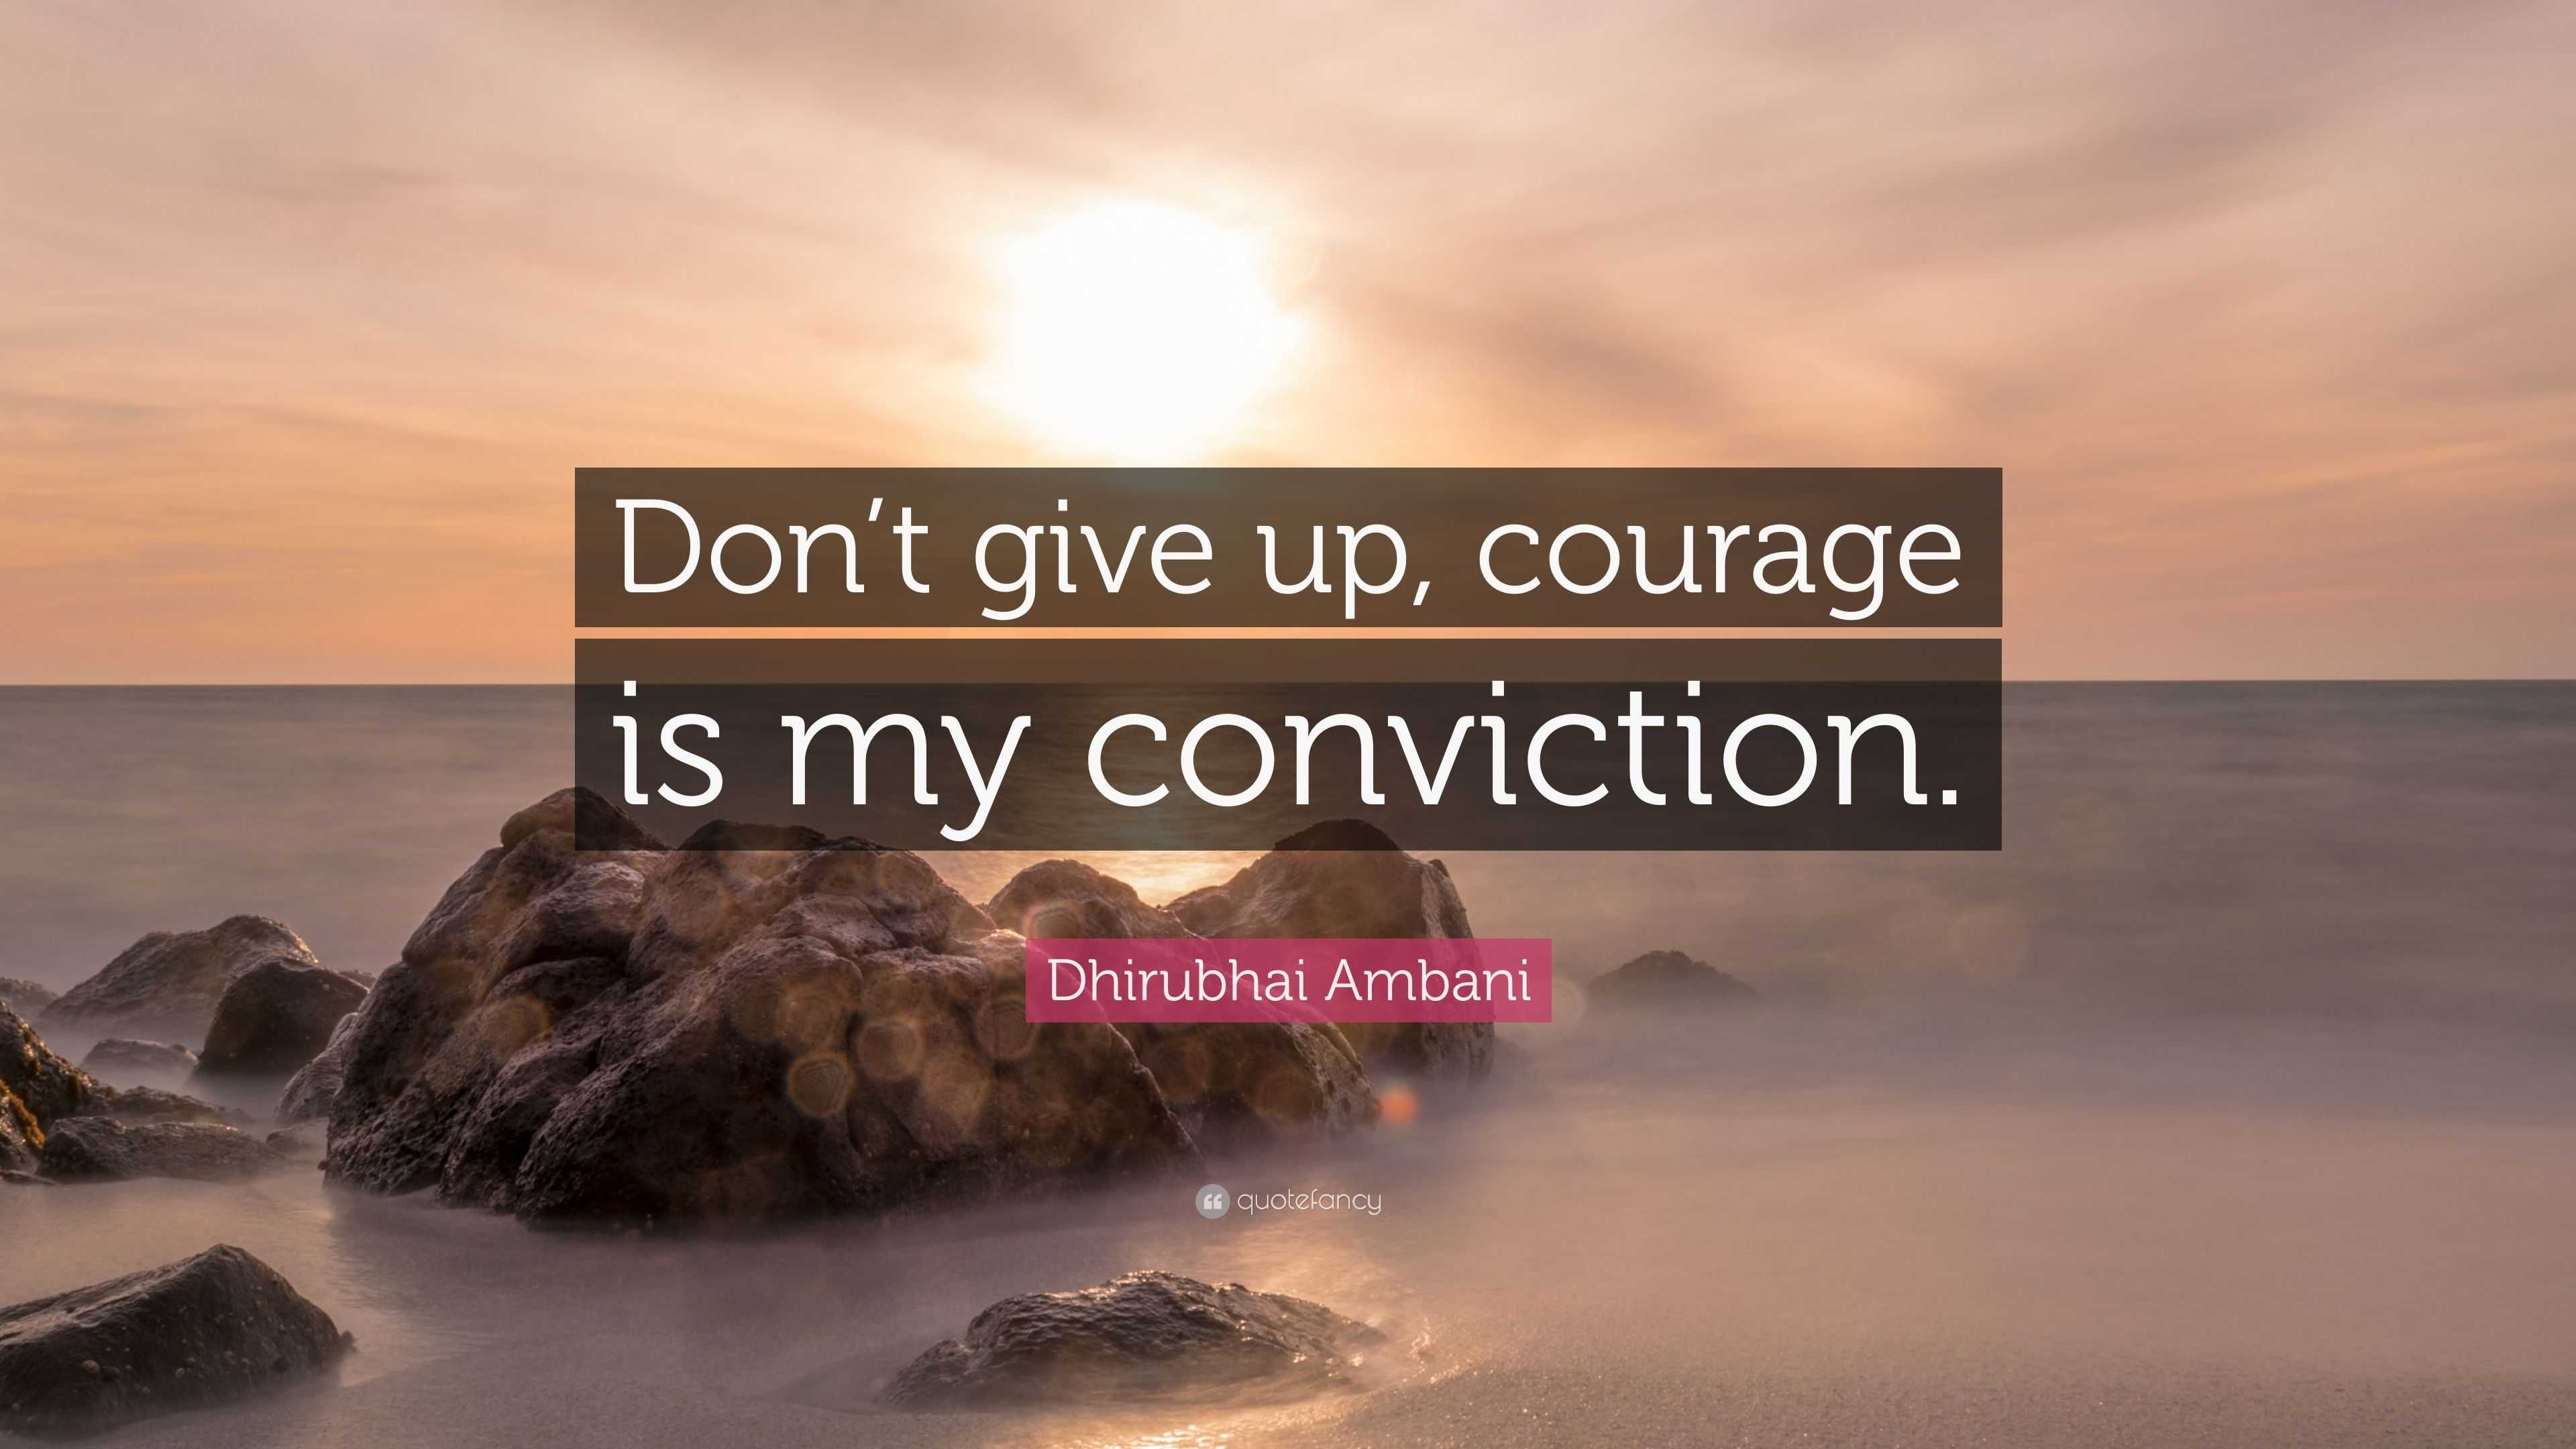 Dhirubhai Ambani Quote: “Don’t give up, courage is my conviction.”